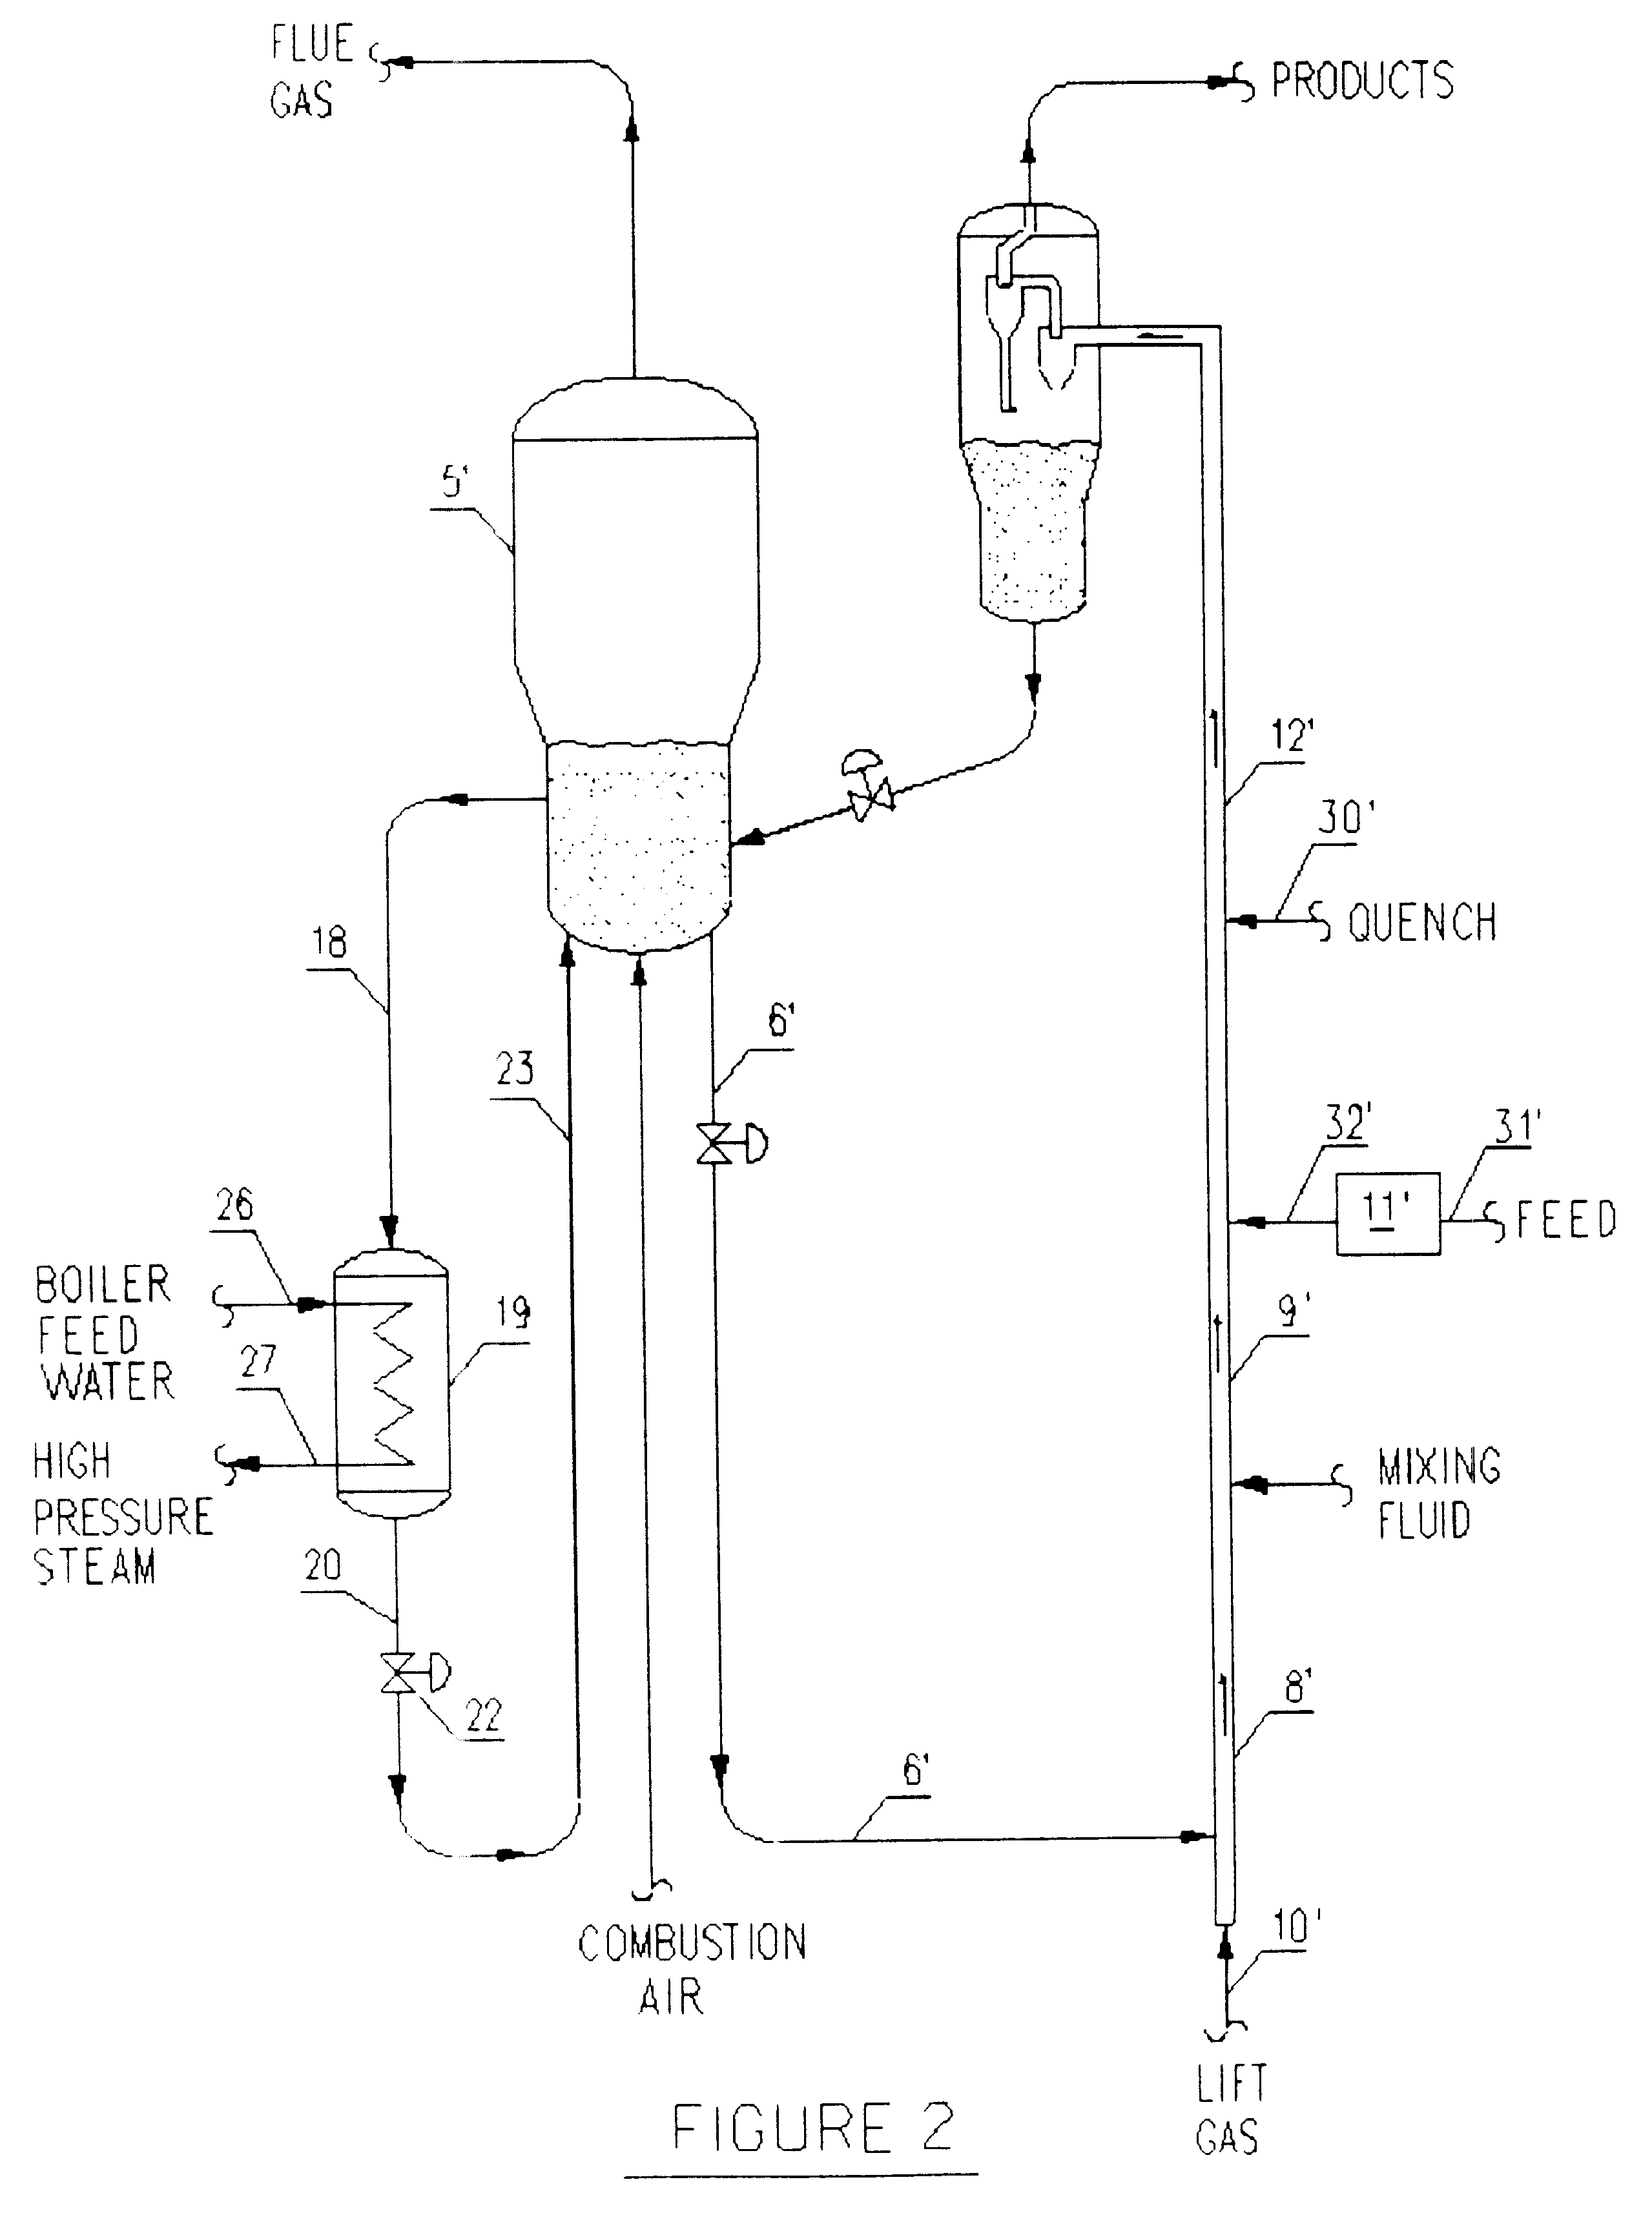 Process for the fluid catalytic cracking with pre-vaporized feed